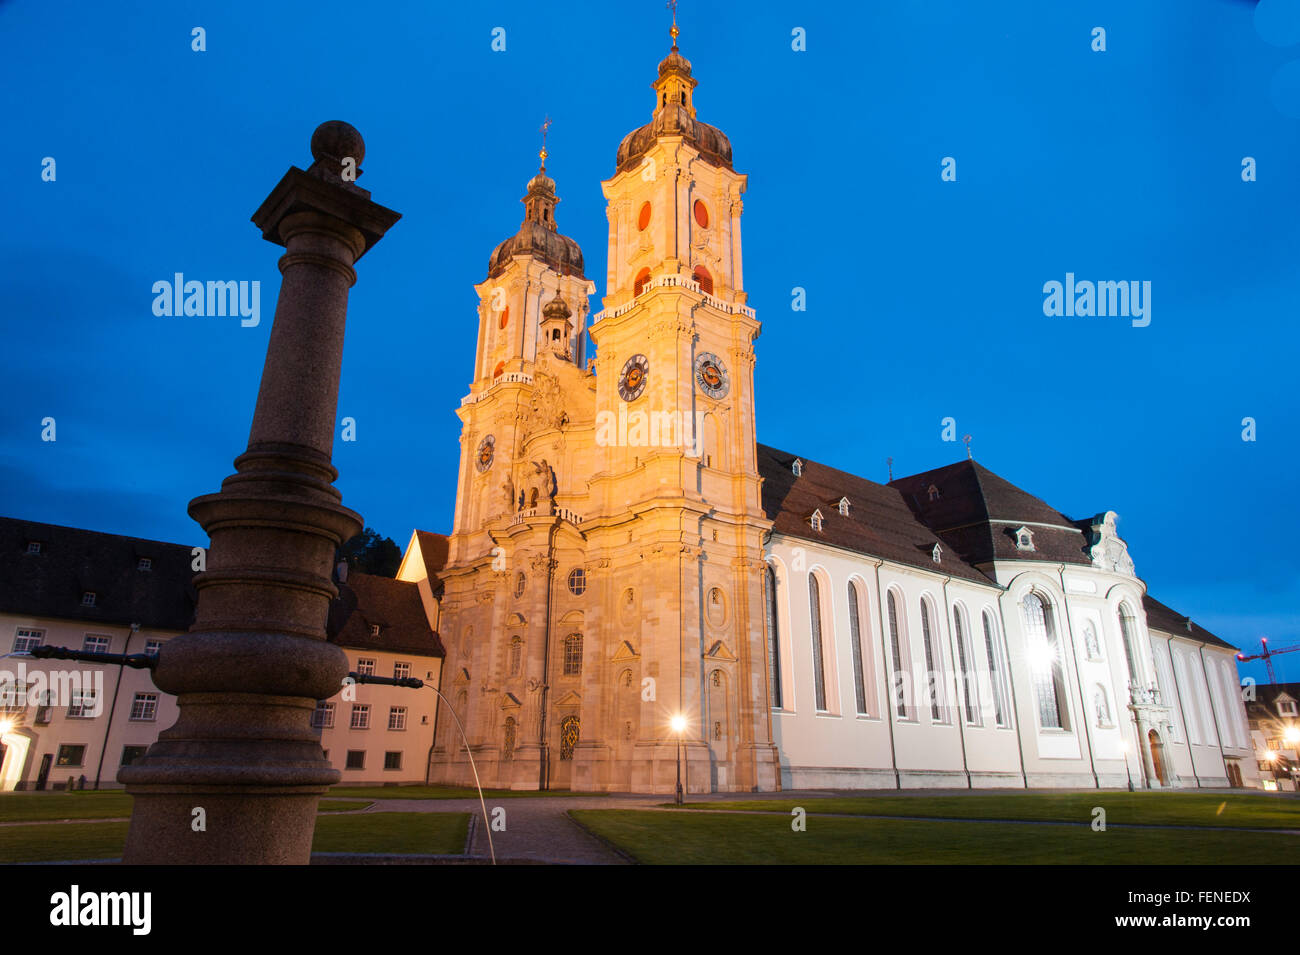 Cathedral (former collegiate church), at dusk, UNESCO World Heritage Site Convent of St Gall, Canton St. Gallen, Switzerland Stock Photo